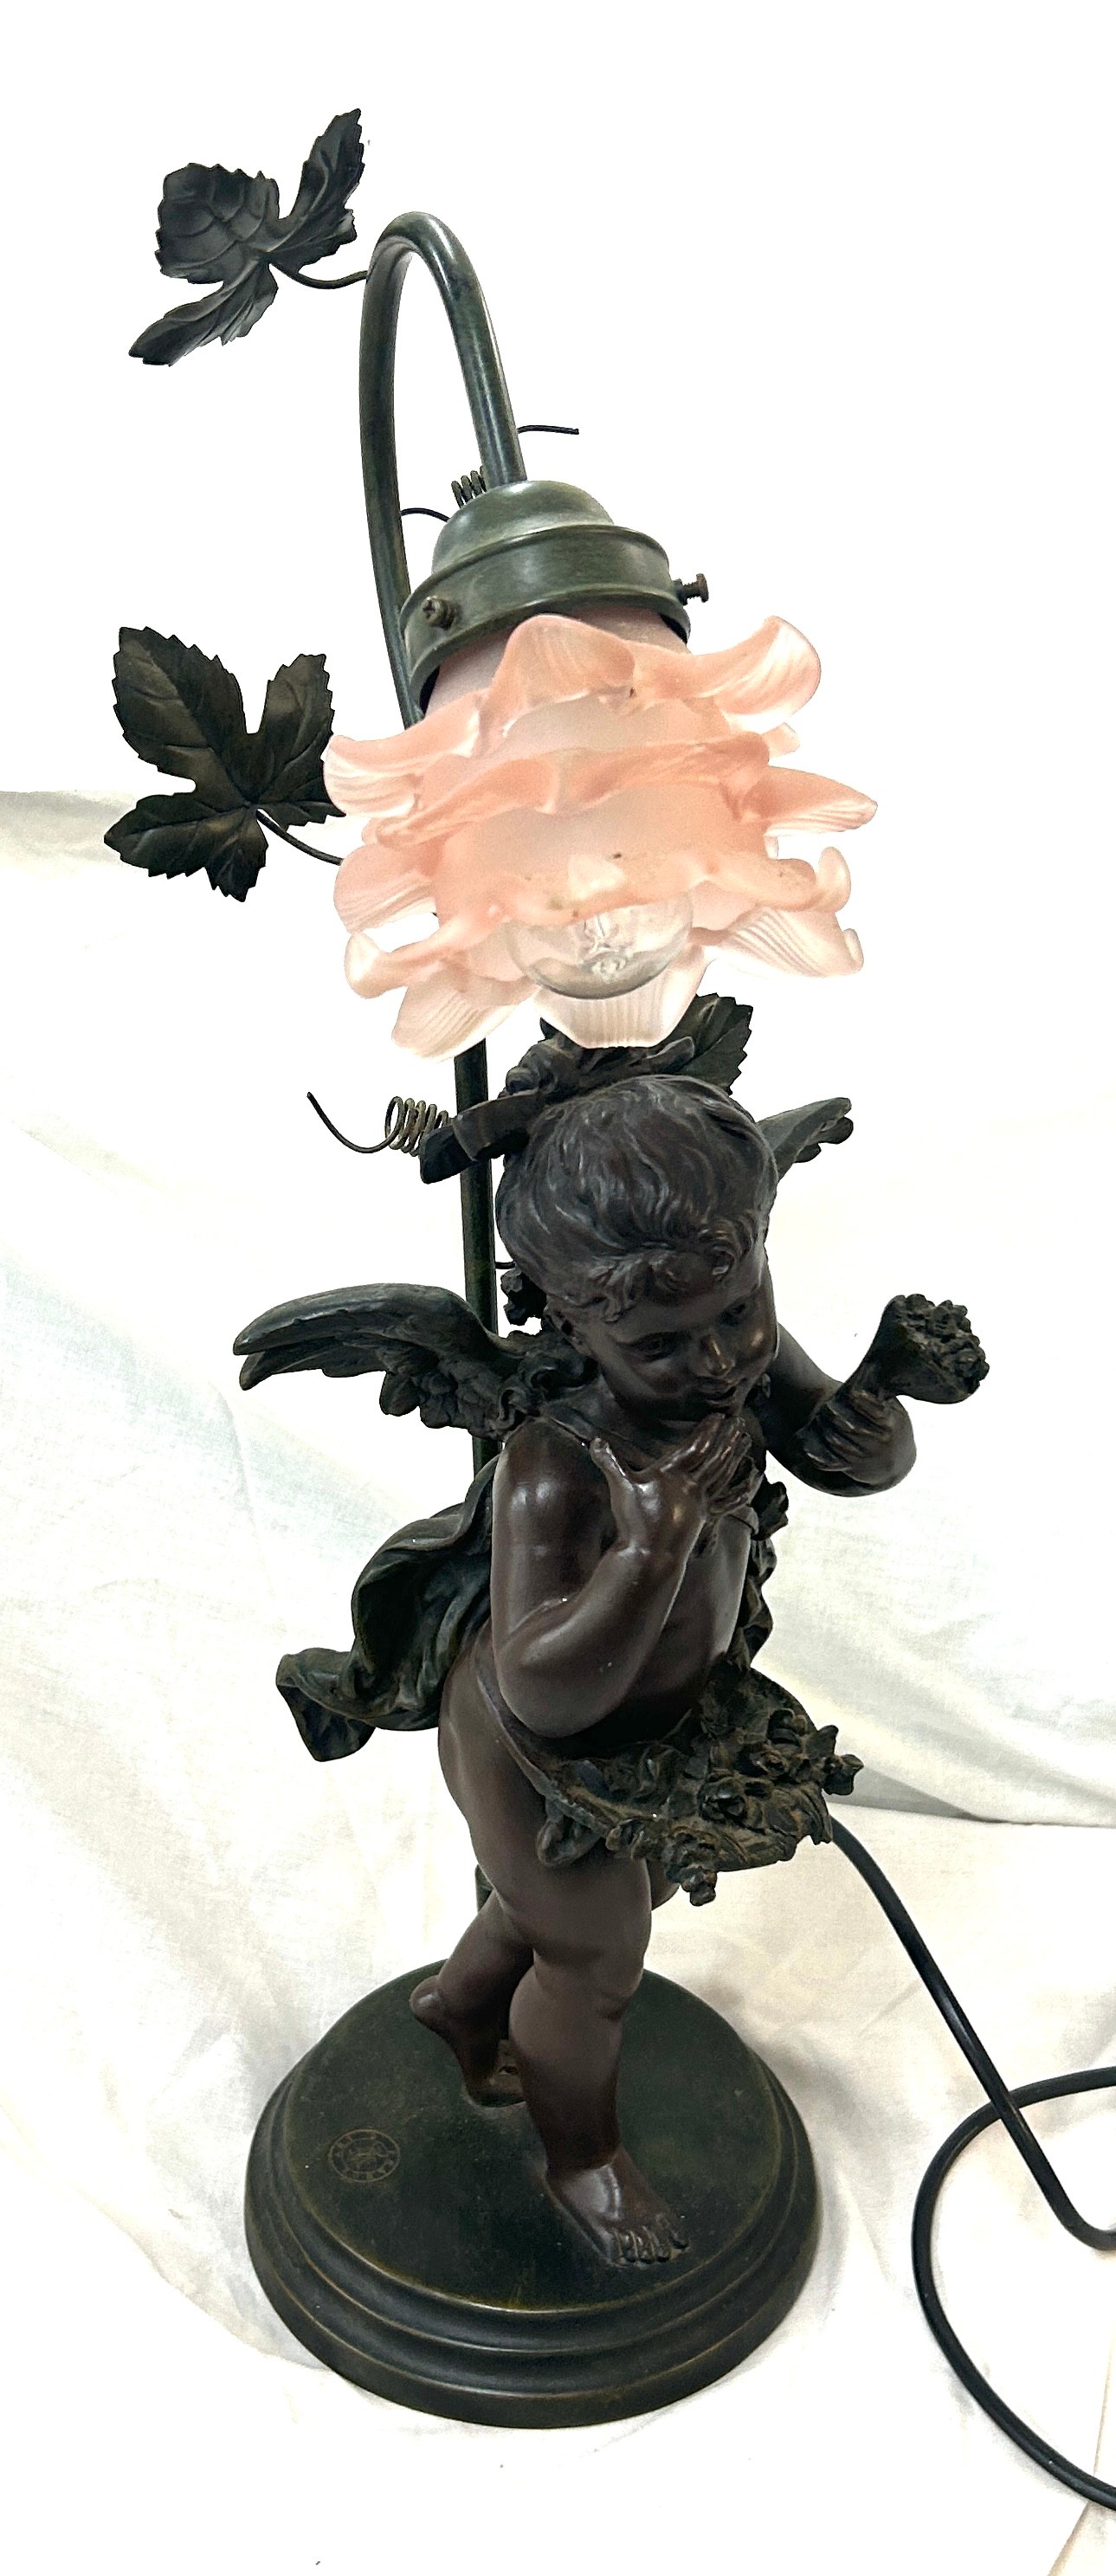 Resin cherub lamp stamped Art D France overall height 25 inches tall - Image 2 of 4